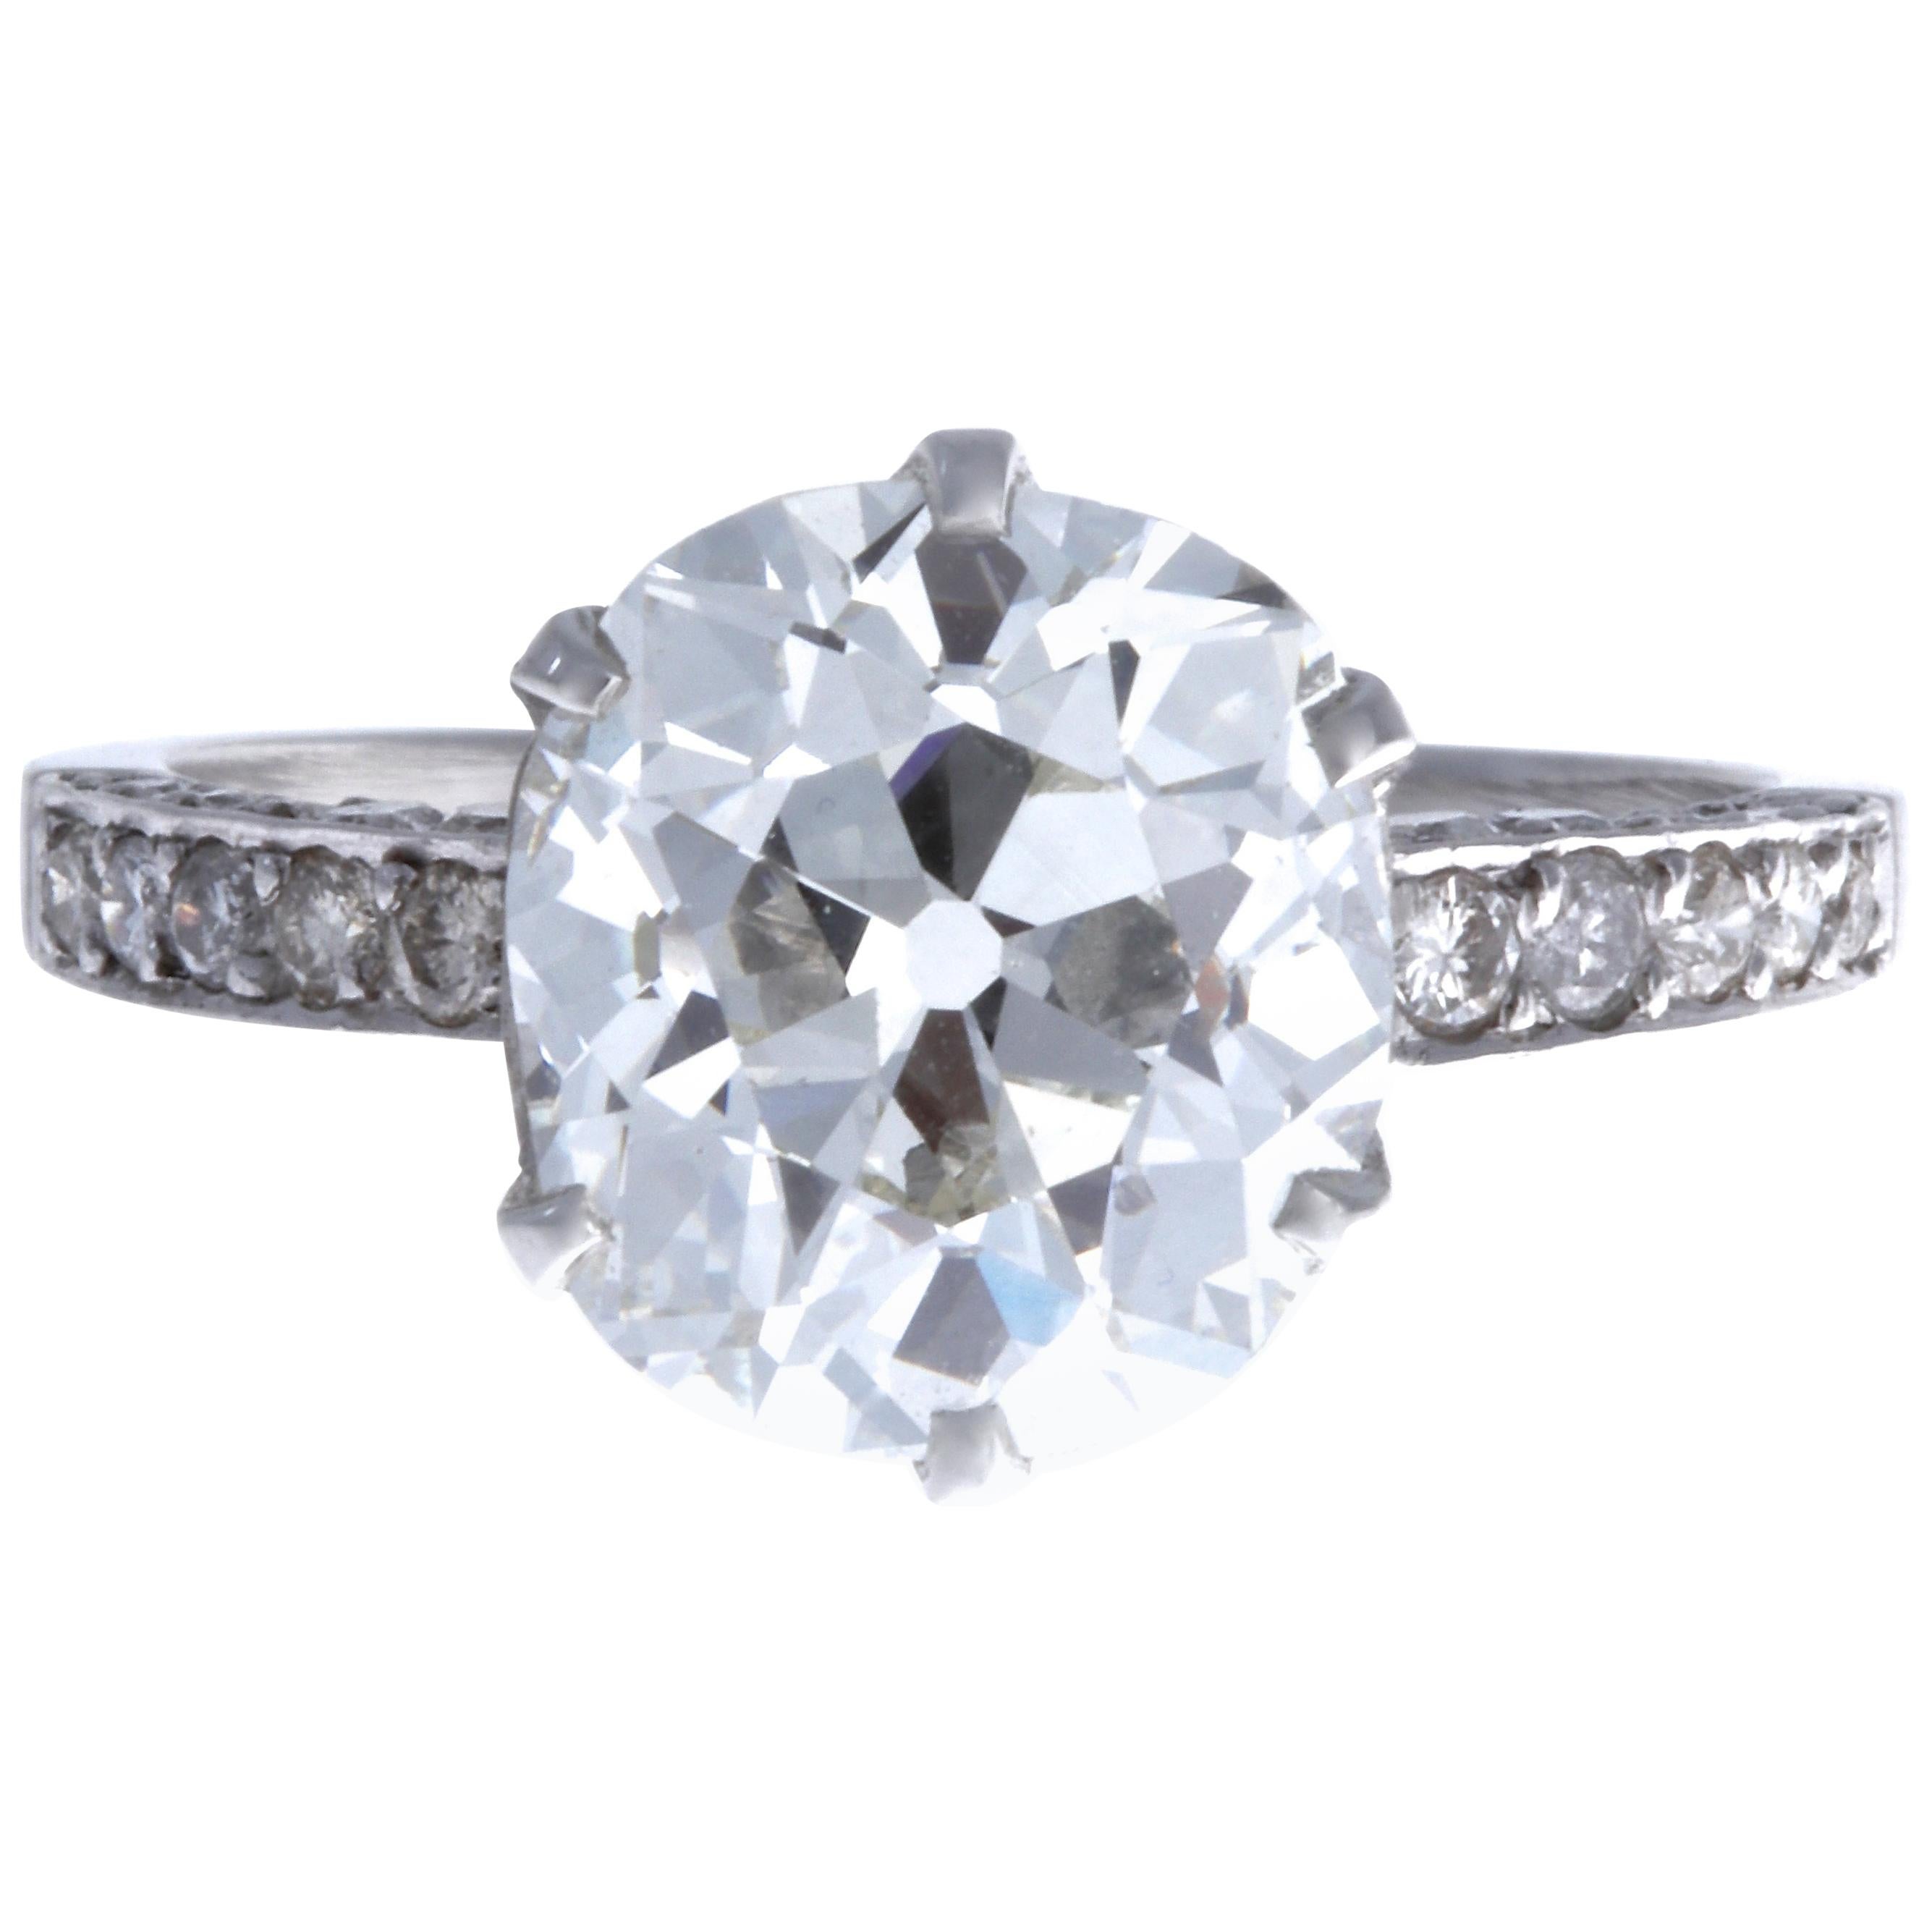 The ultimate vintage engagement ring. The perfect diamond, setting and the stunning band, all make a dream ring. No matter where you go, this ring is definitely eye-catching. The GIA certified antique cushion cut diamond is 4.31 carats, J color, VS2